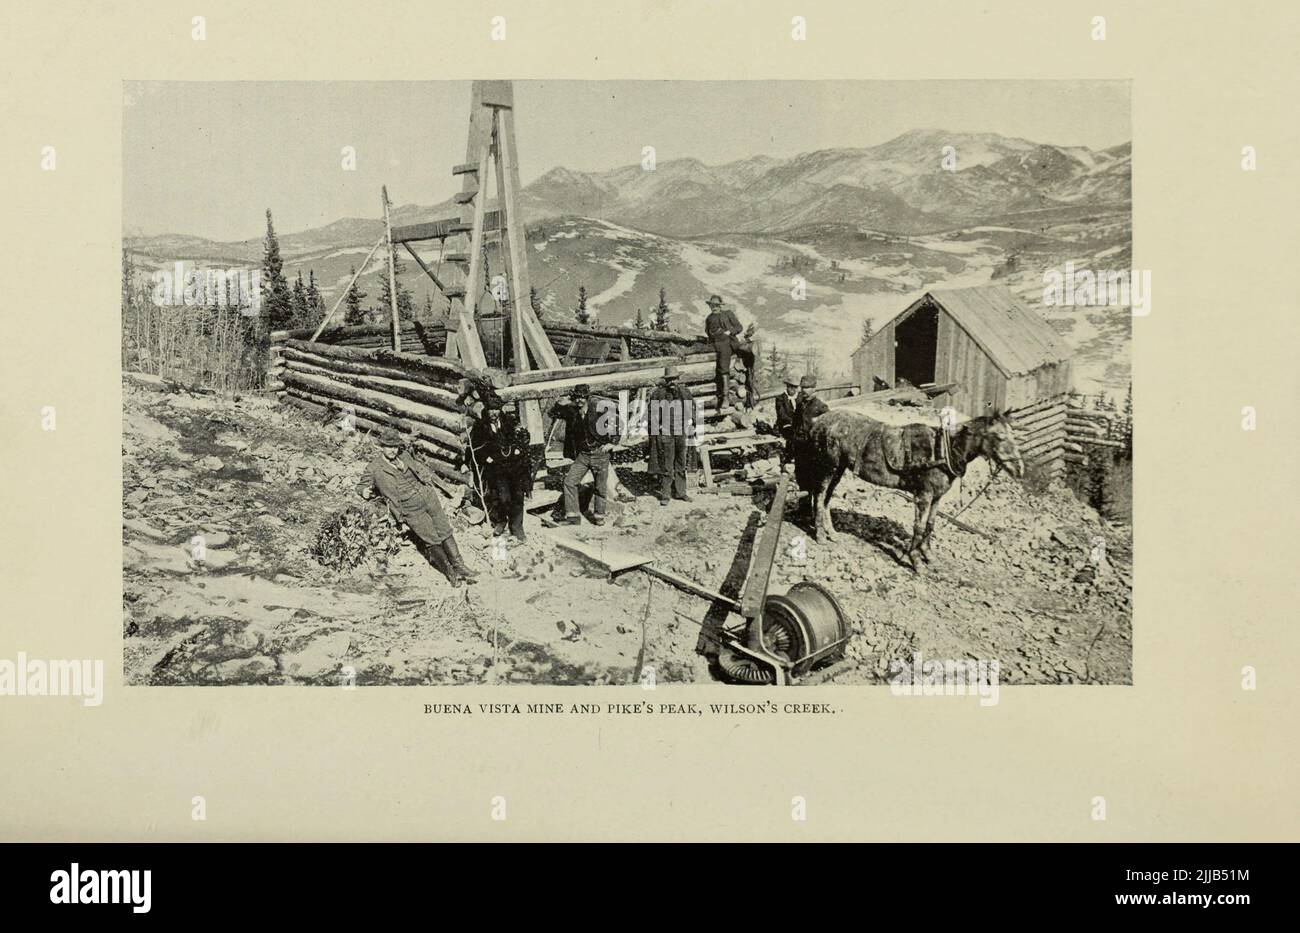 Buena Vista Mine and Pike's Peak, Cripple Creek, Colorado from the article ' COLORADO'S NEW GOLD-CAMPS ' By Prof. Arthur Lakes from The Engineering Magazine DEVOTED TO INDUSTRIAL PROGRESS Volume VII April to September, 1894 NEW YORK The Engineering Magazine Co Stock Photo